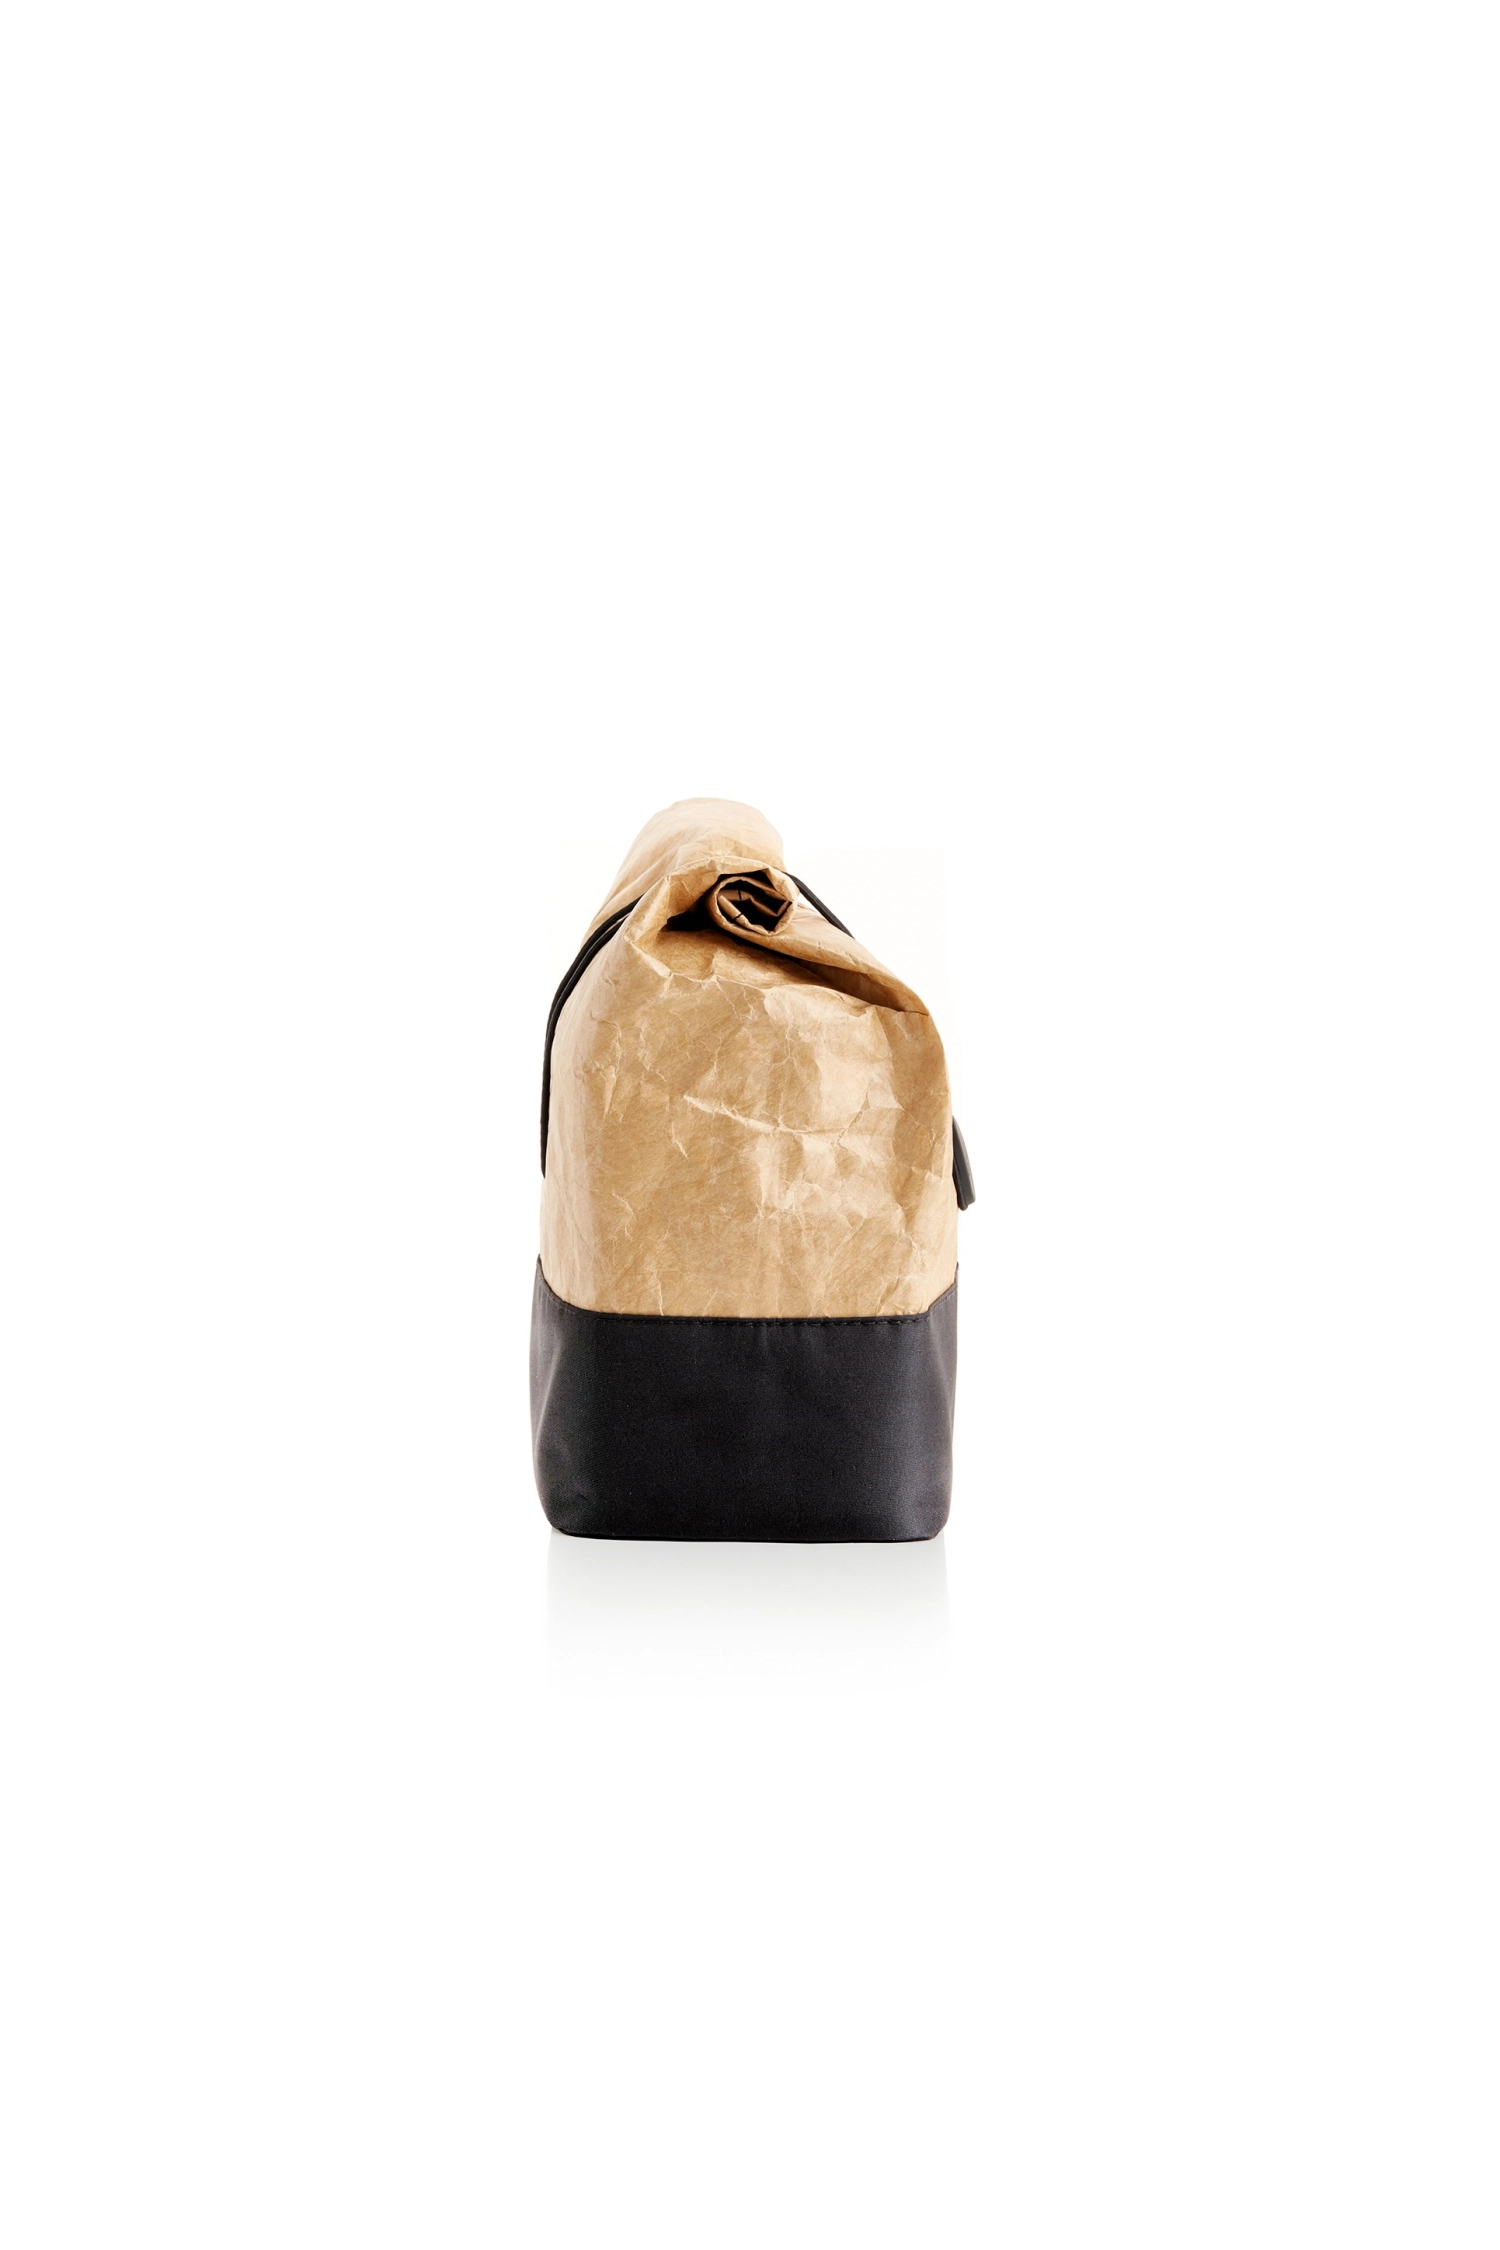 Lunchbag to go marron clair